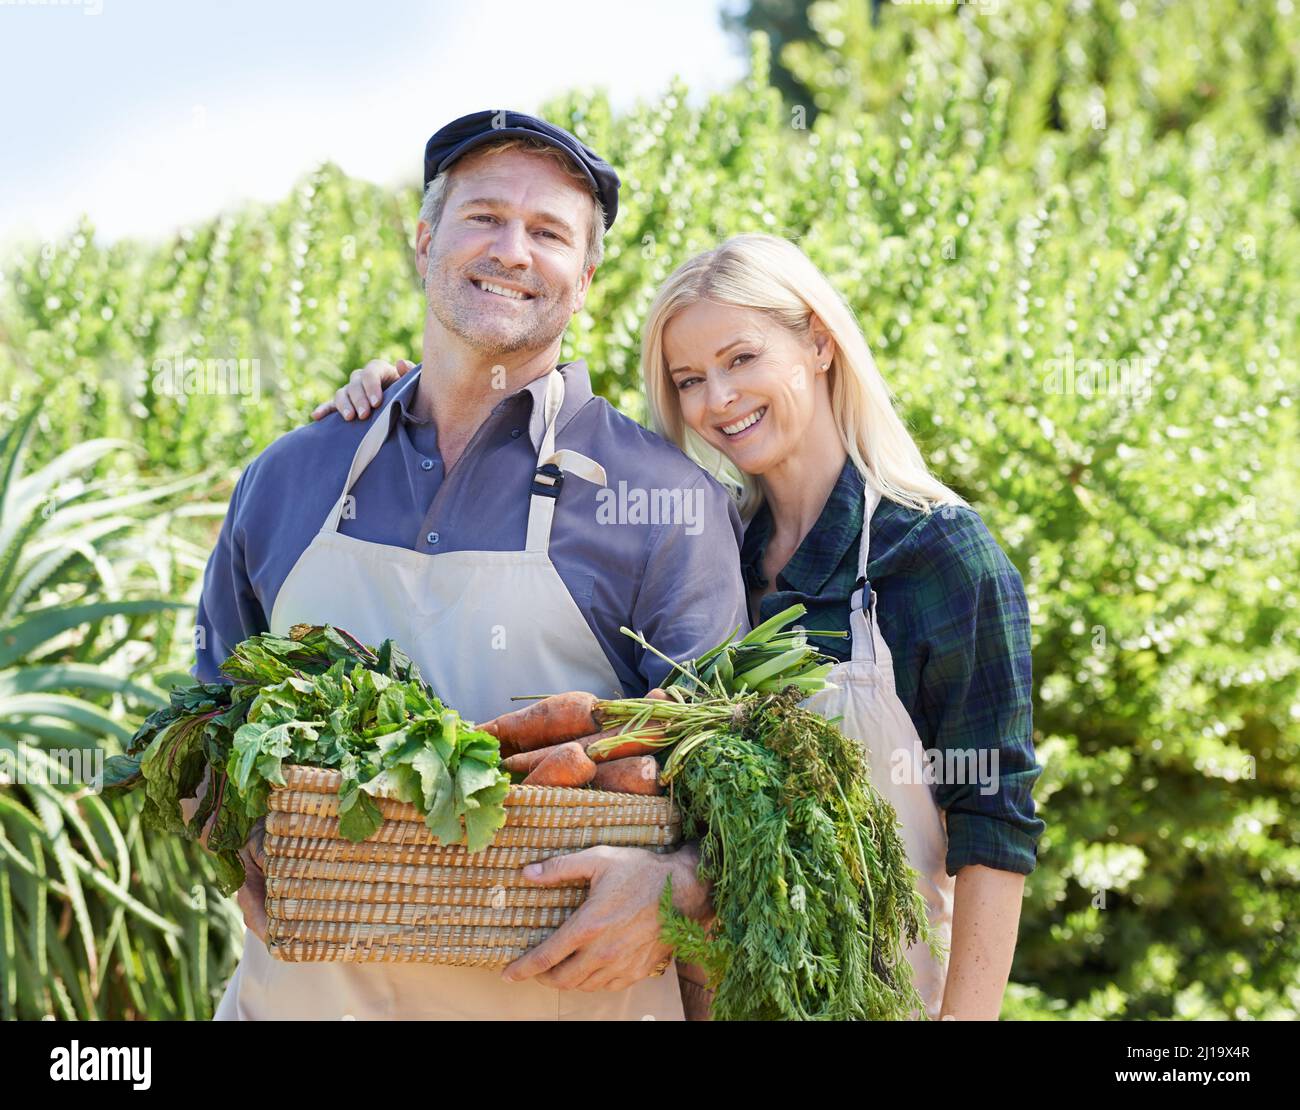 Proud of their produce. A mature farmer couple holding a basket of freshly picked vegetables. Stock Photo